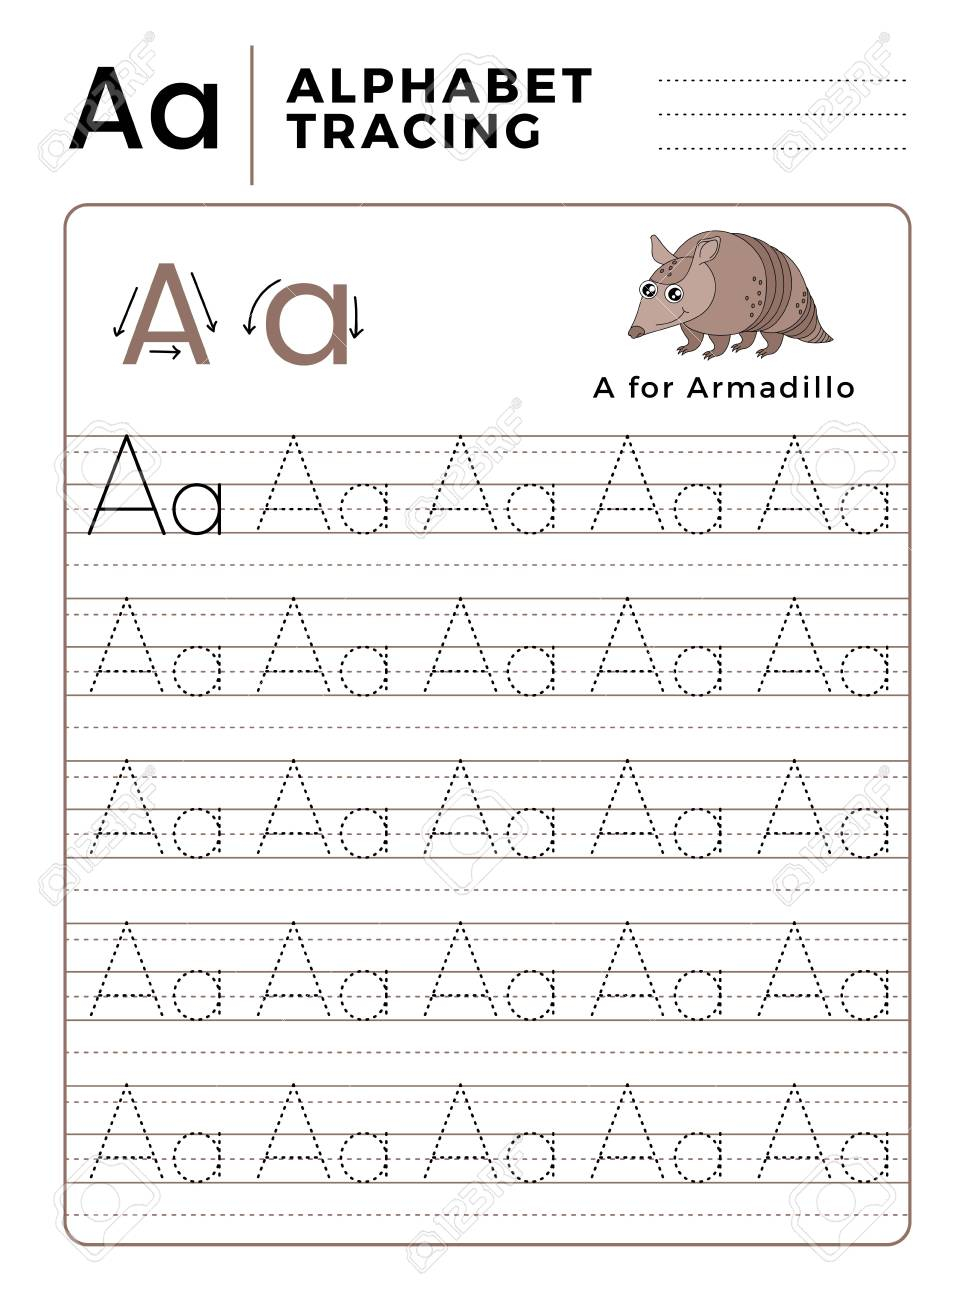 Letter A Alphabet Tracing Book With Example And Funny Armadillo.. pertaining to Alphabet Tracing Book